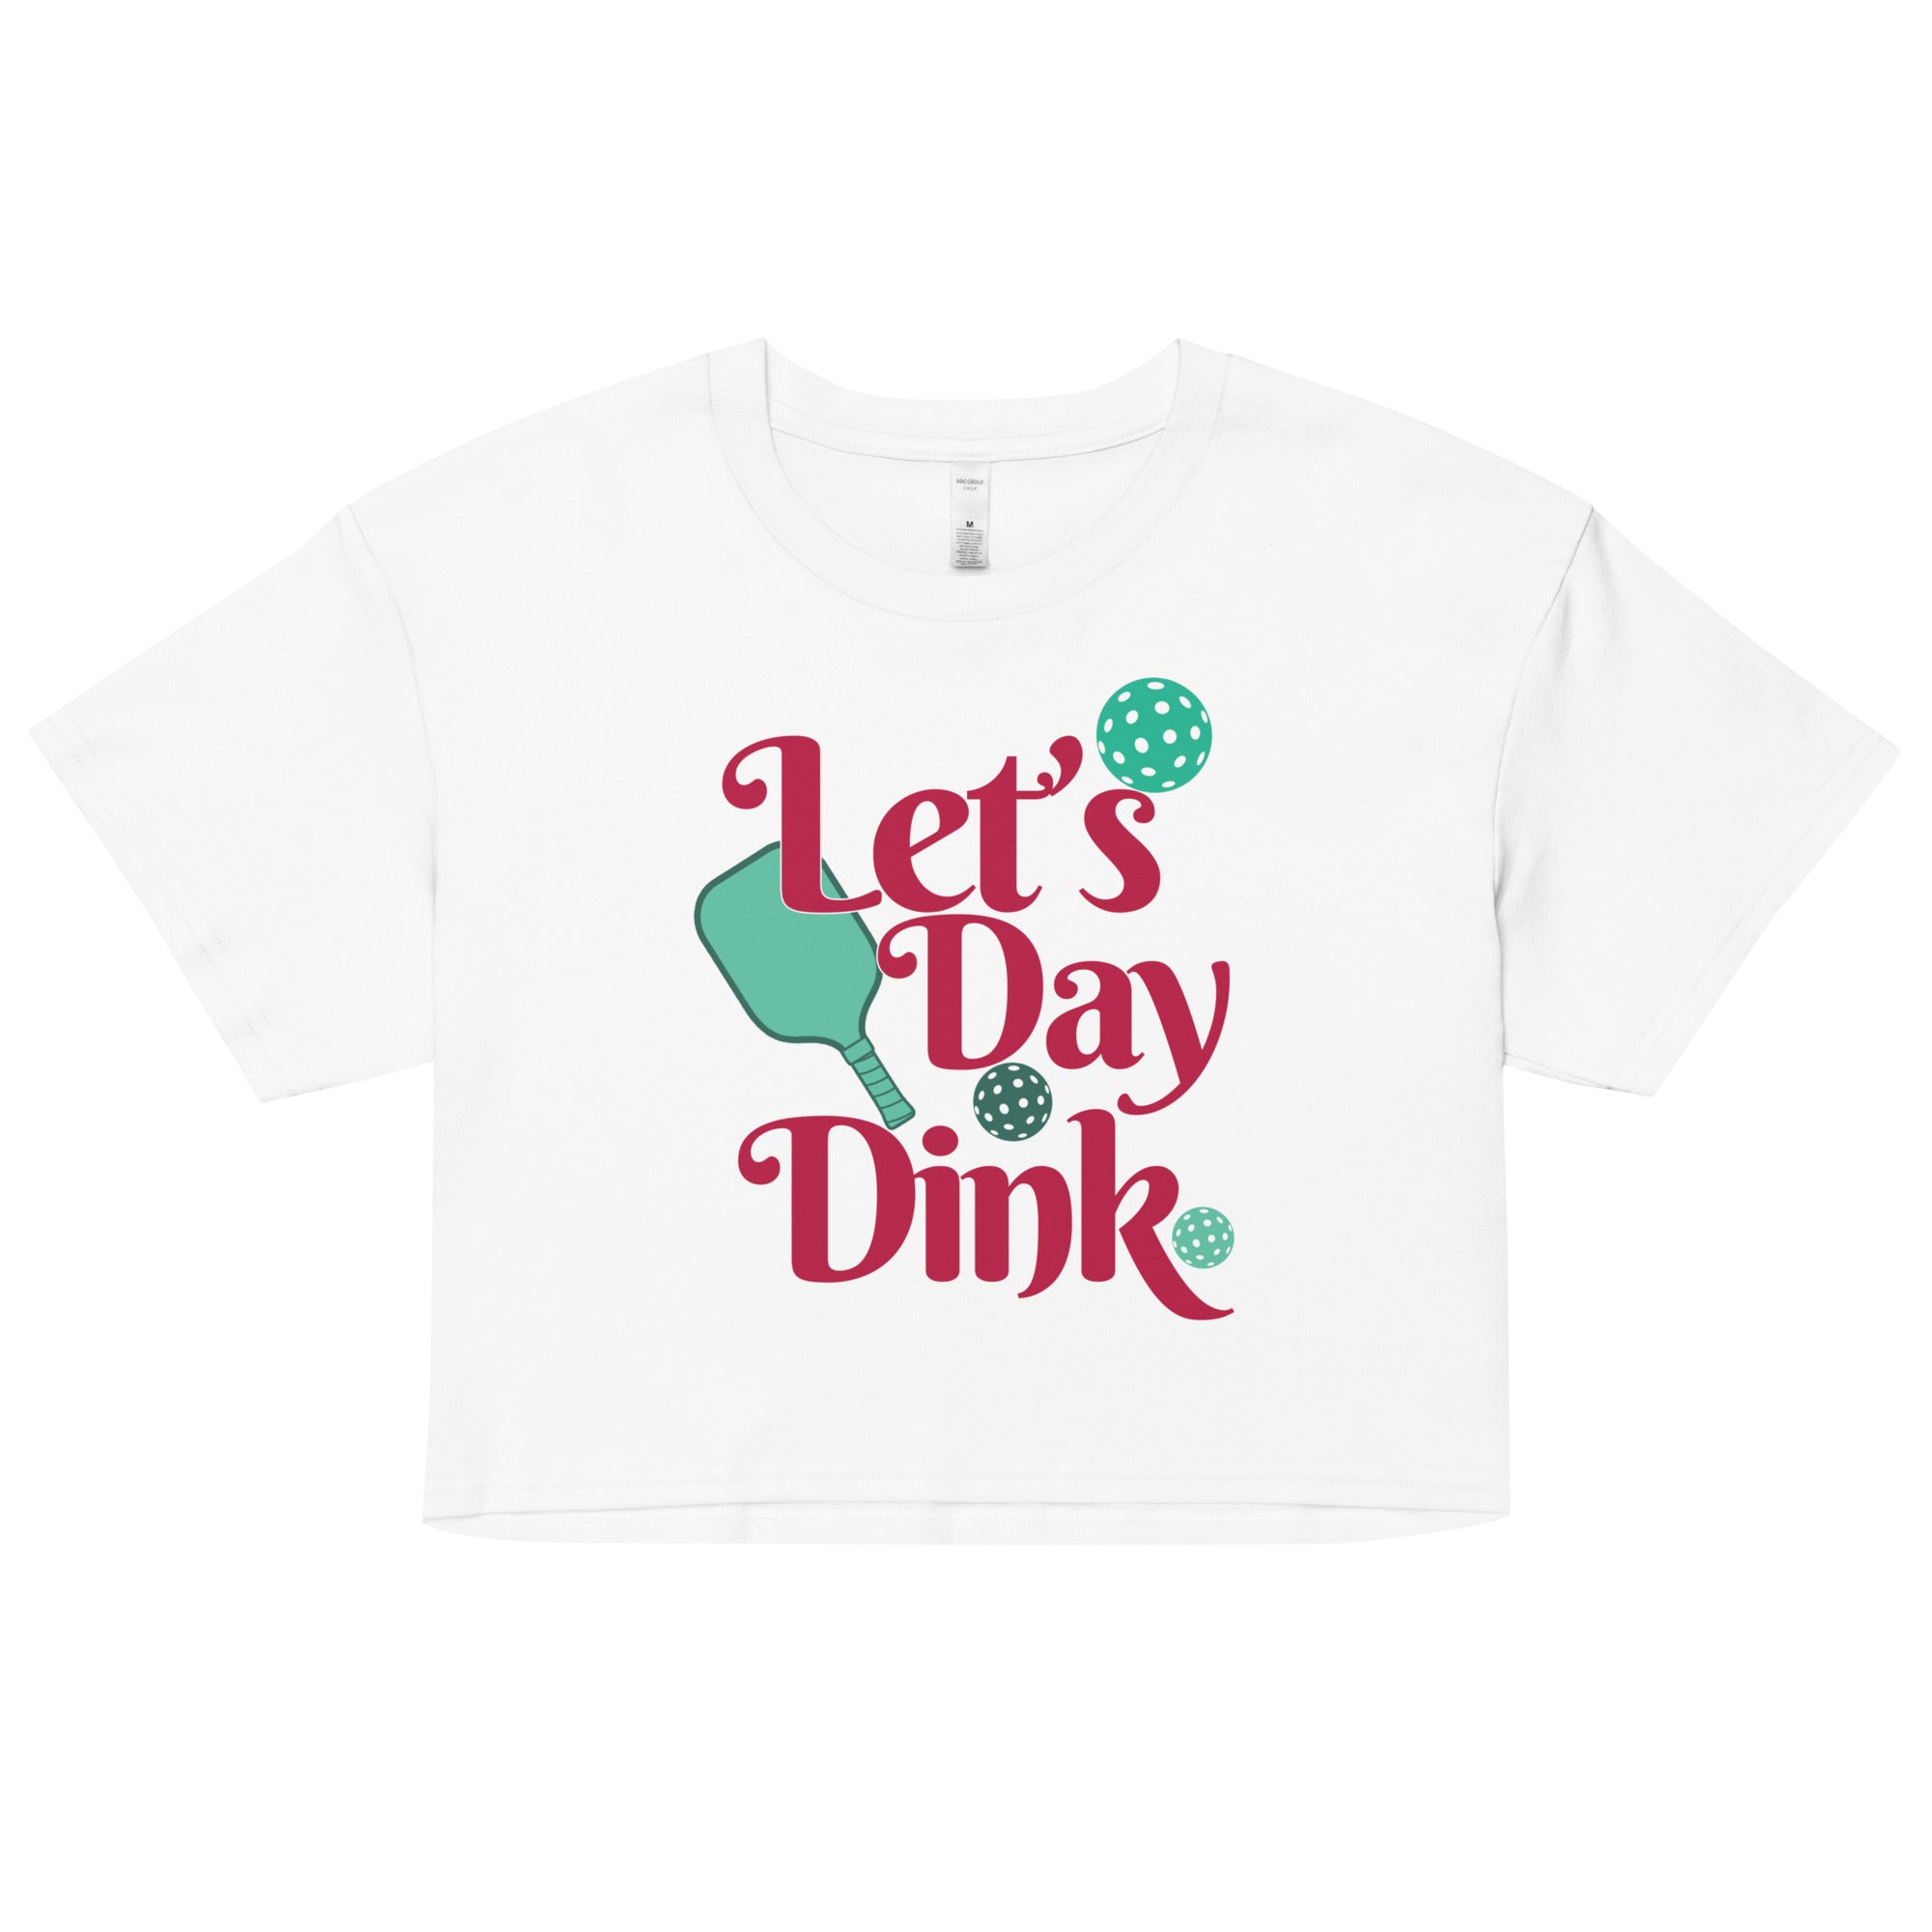 white let's day dink women's crop top pickleball apparel performance shirt athletic top front view